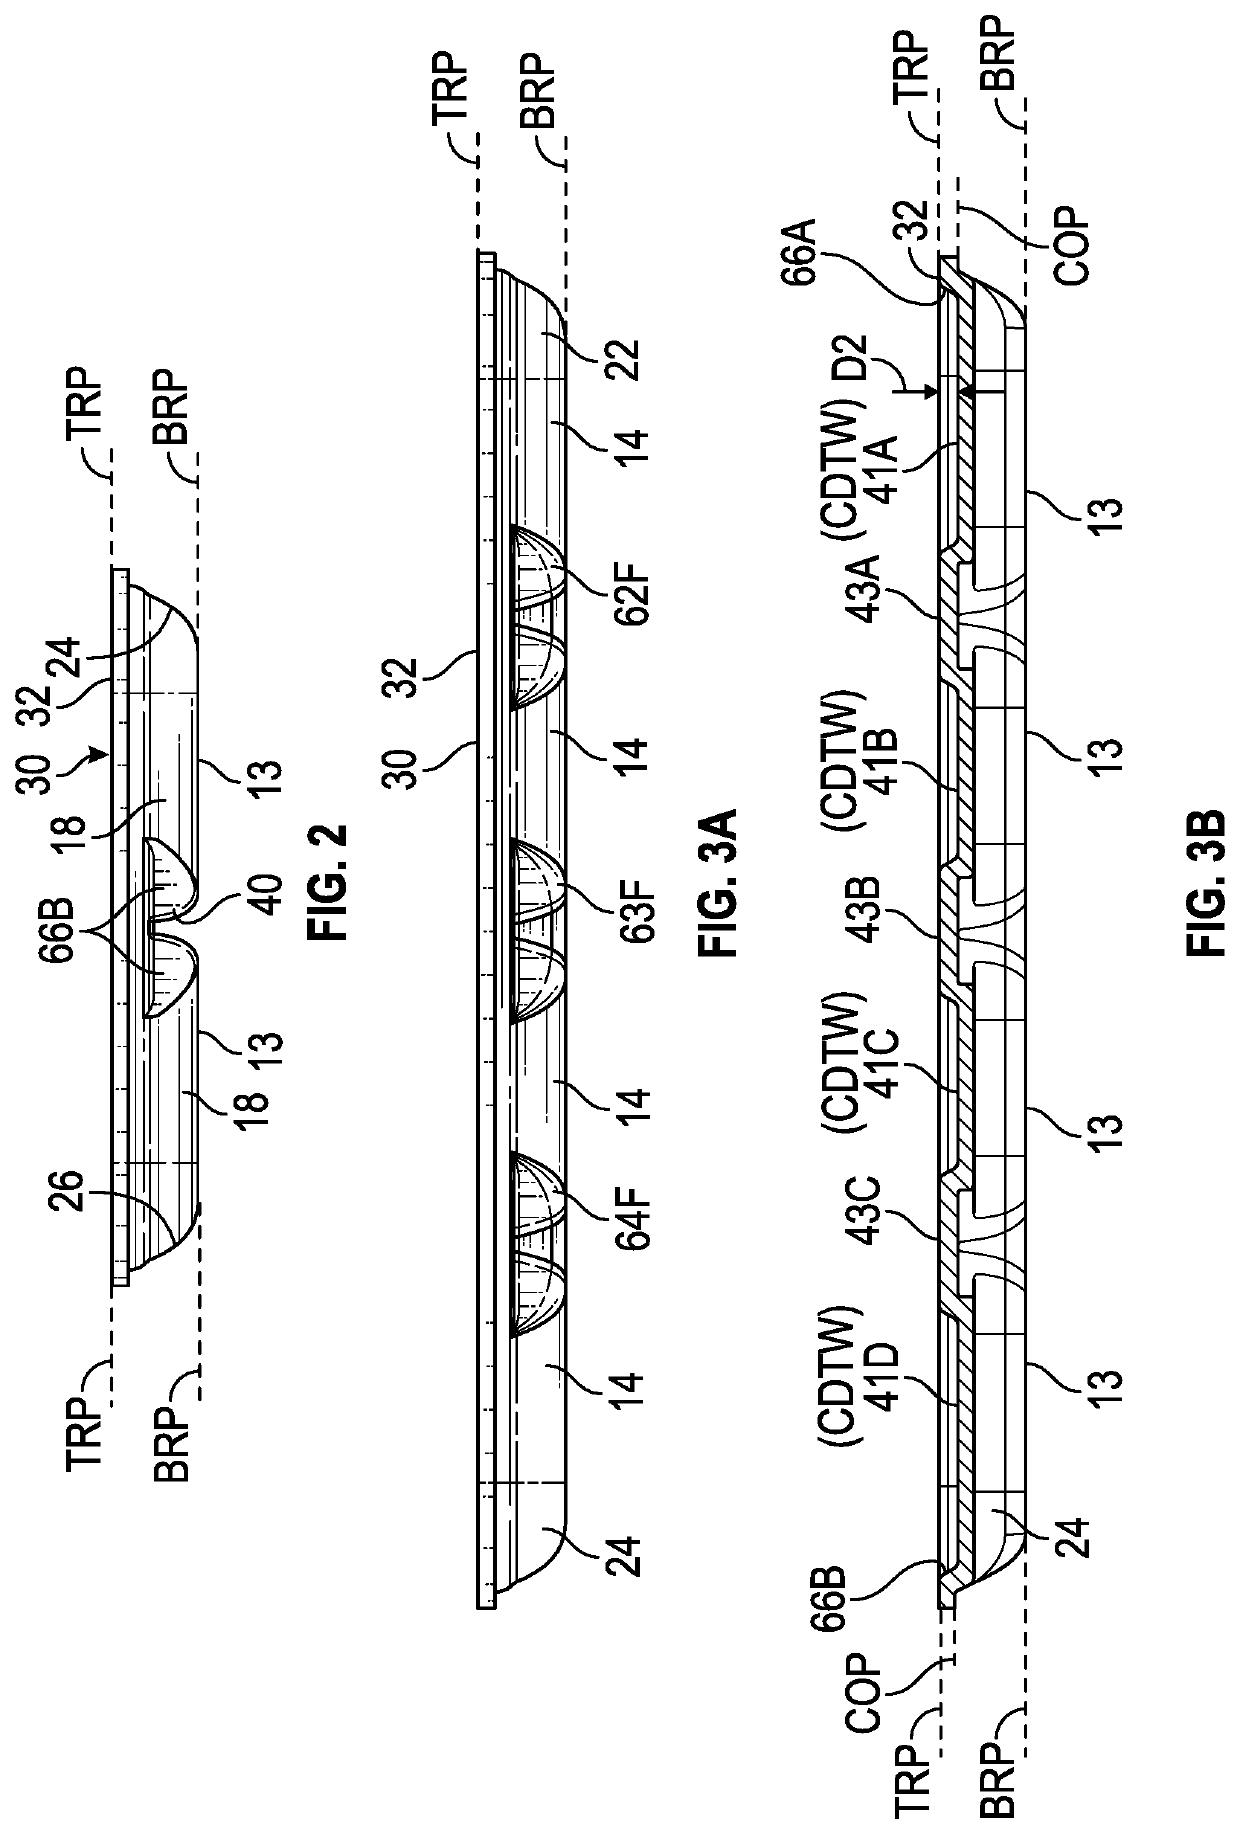 Meat patty tray and method of packaging and display